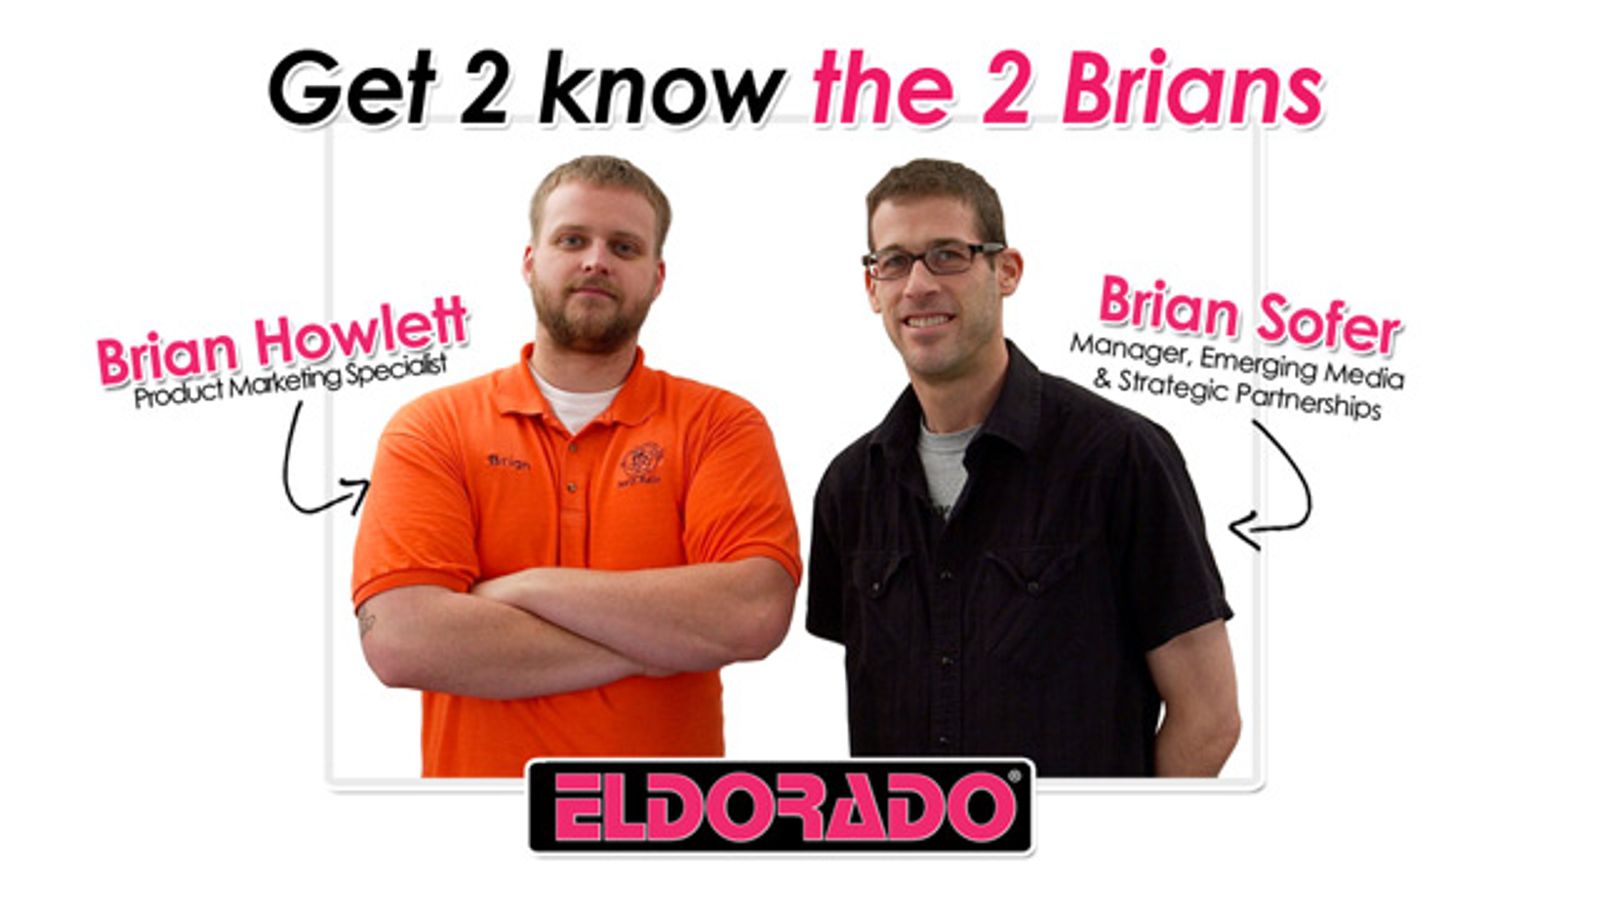 Eldorado to Offer More Joint Campaign Opportunities to Vendors